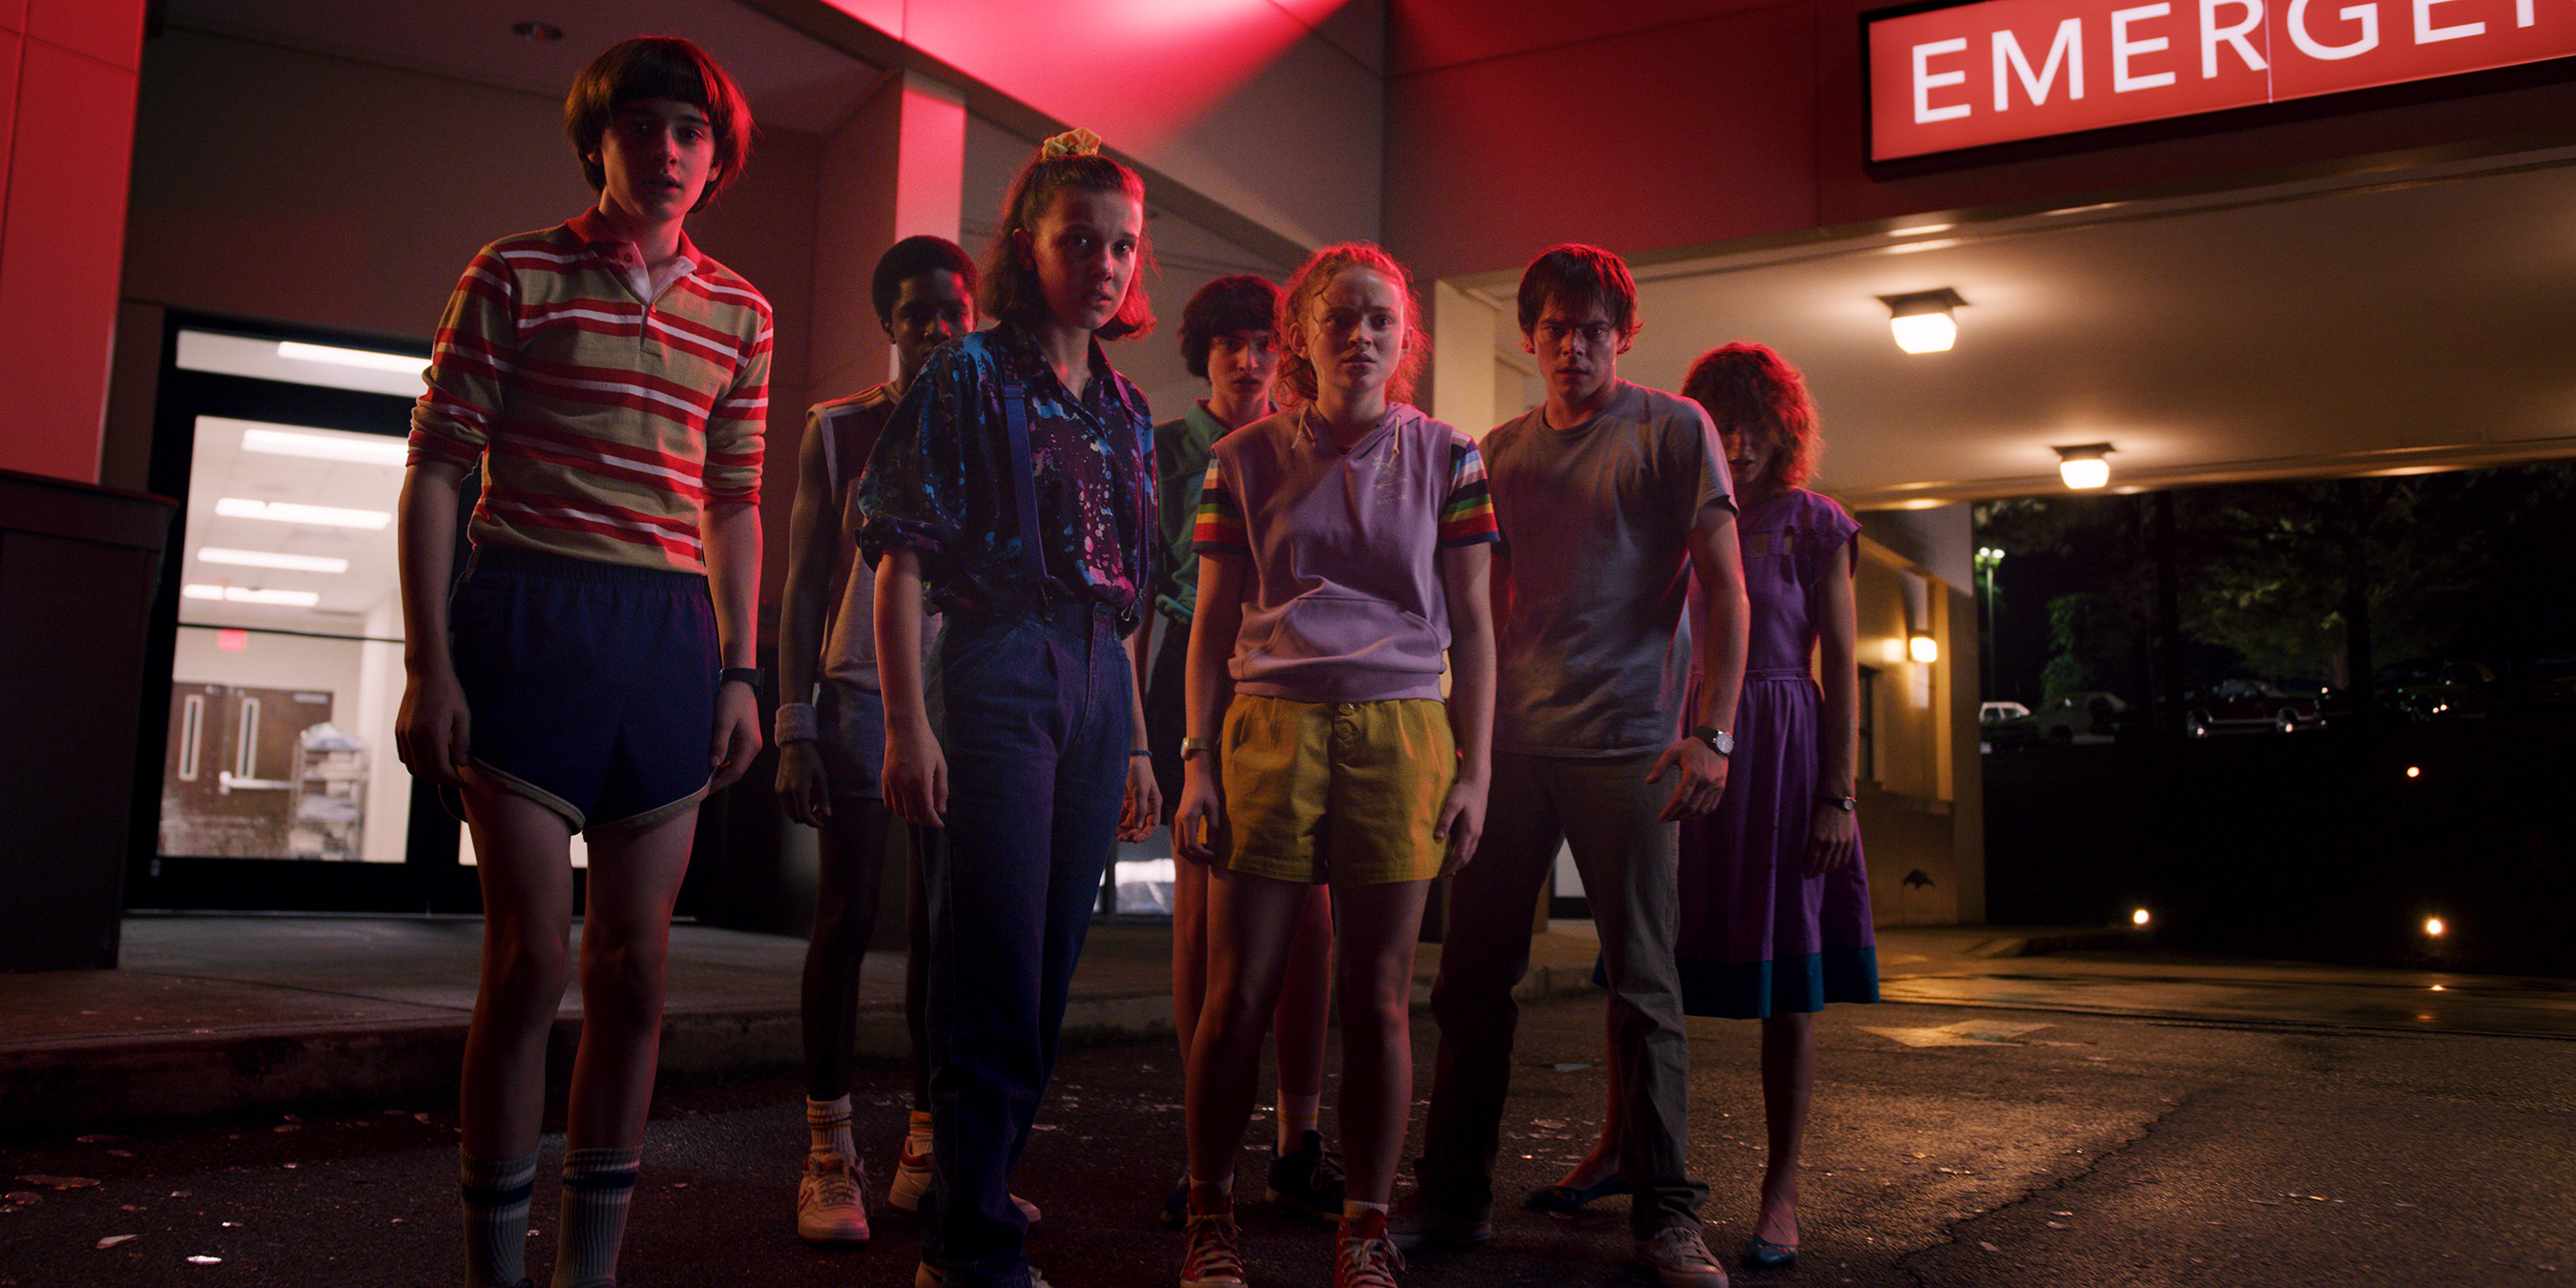 The teenage main characters from Stranger Things stand together in a group, in a shopping mall, lit by red neon lighting.